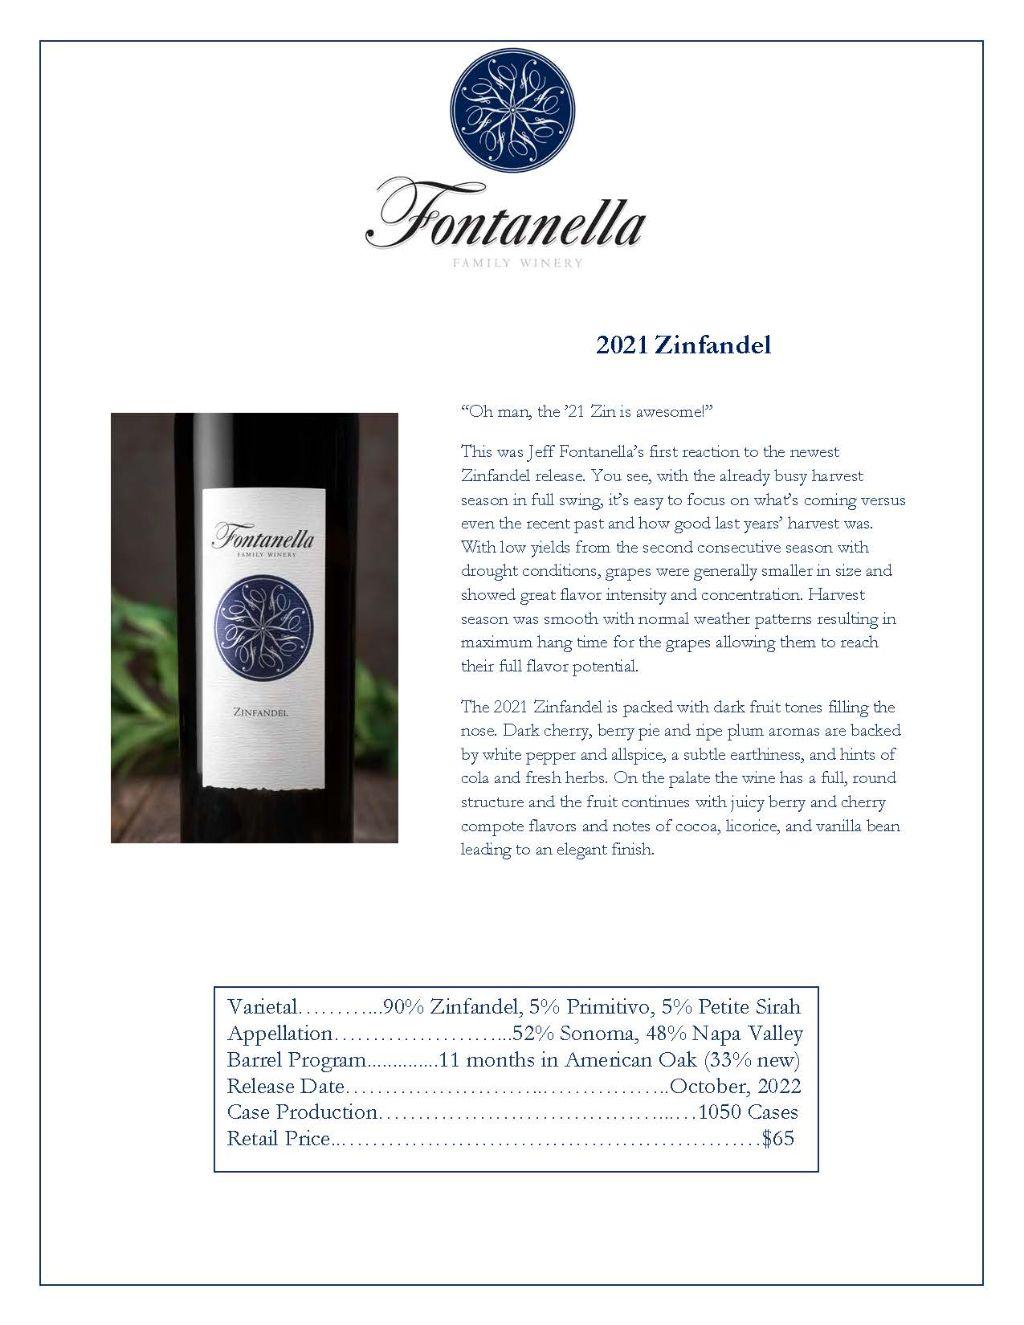 Fontanella Family Winery 2021 Chardonnay and 2021 Zinfandel and tasting for six